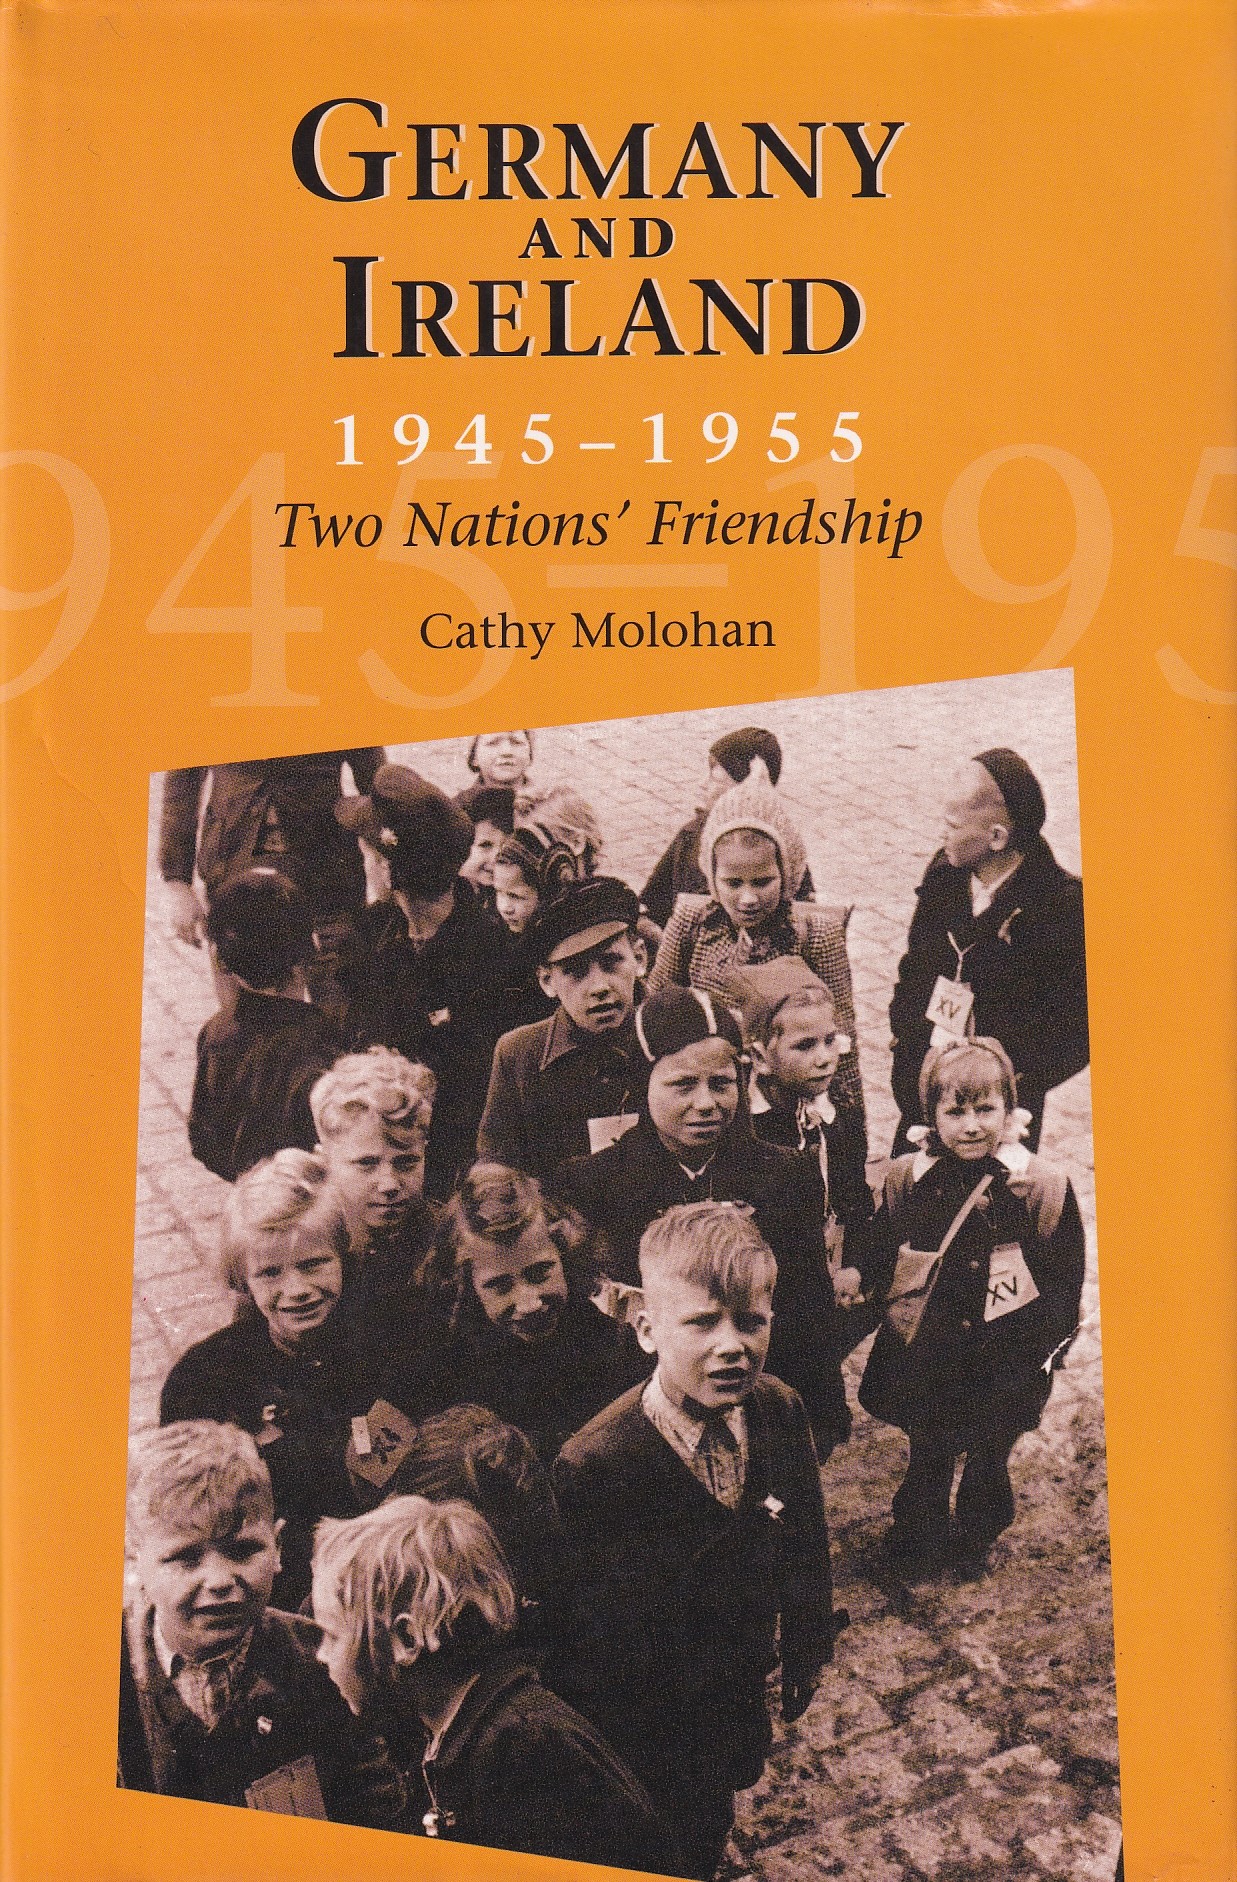 Germany and Ireland, 1945-1955: Two Nations’ Friendship [Signed] by Cathy Molohan